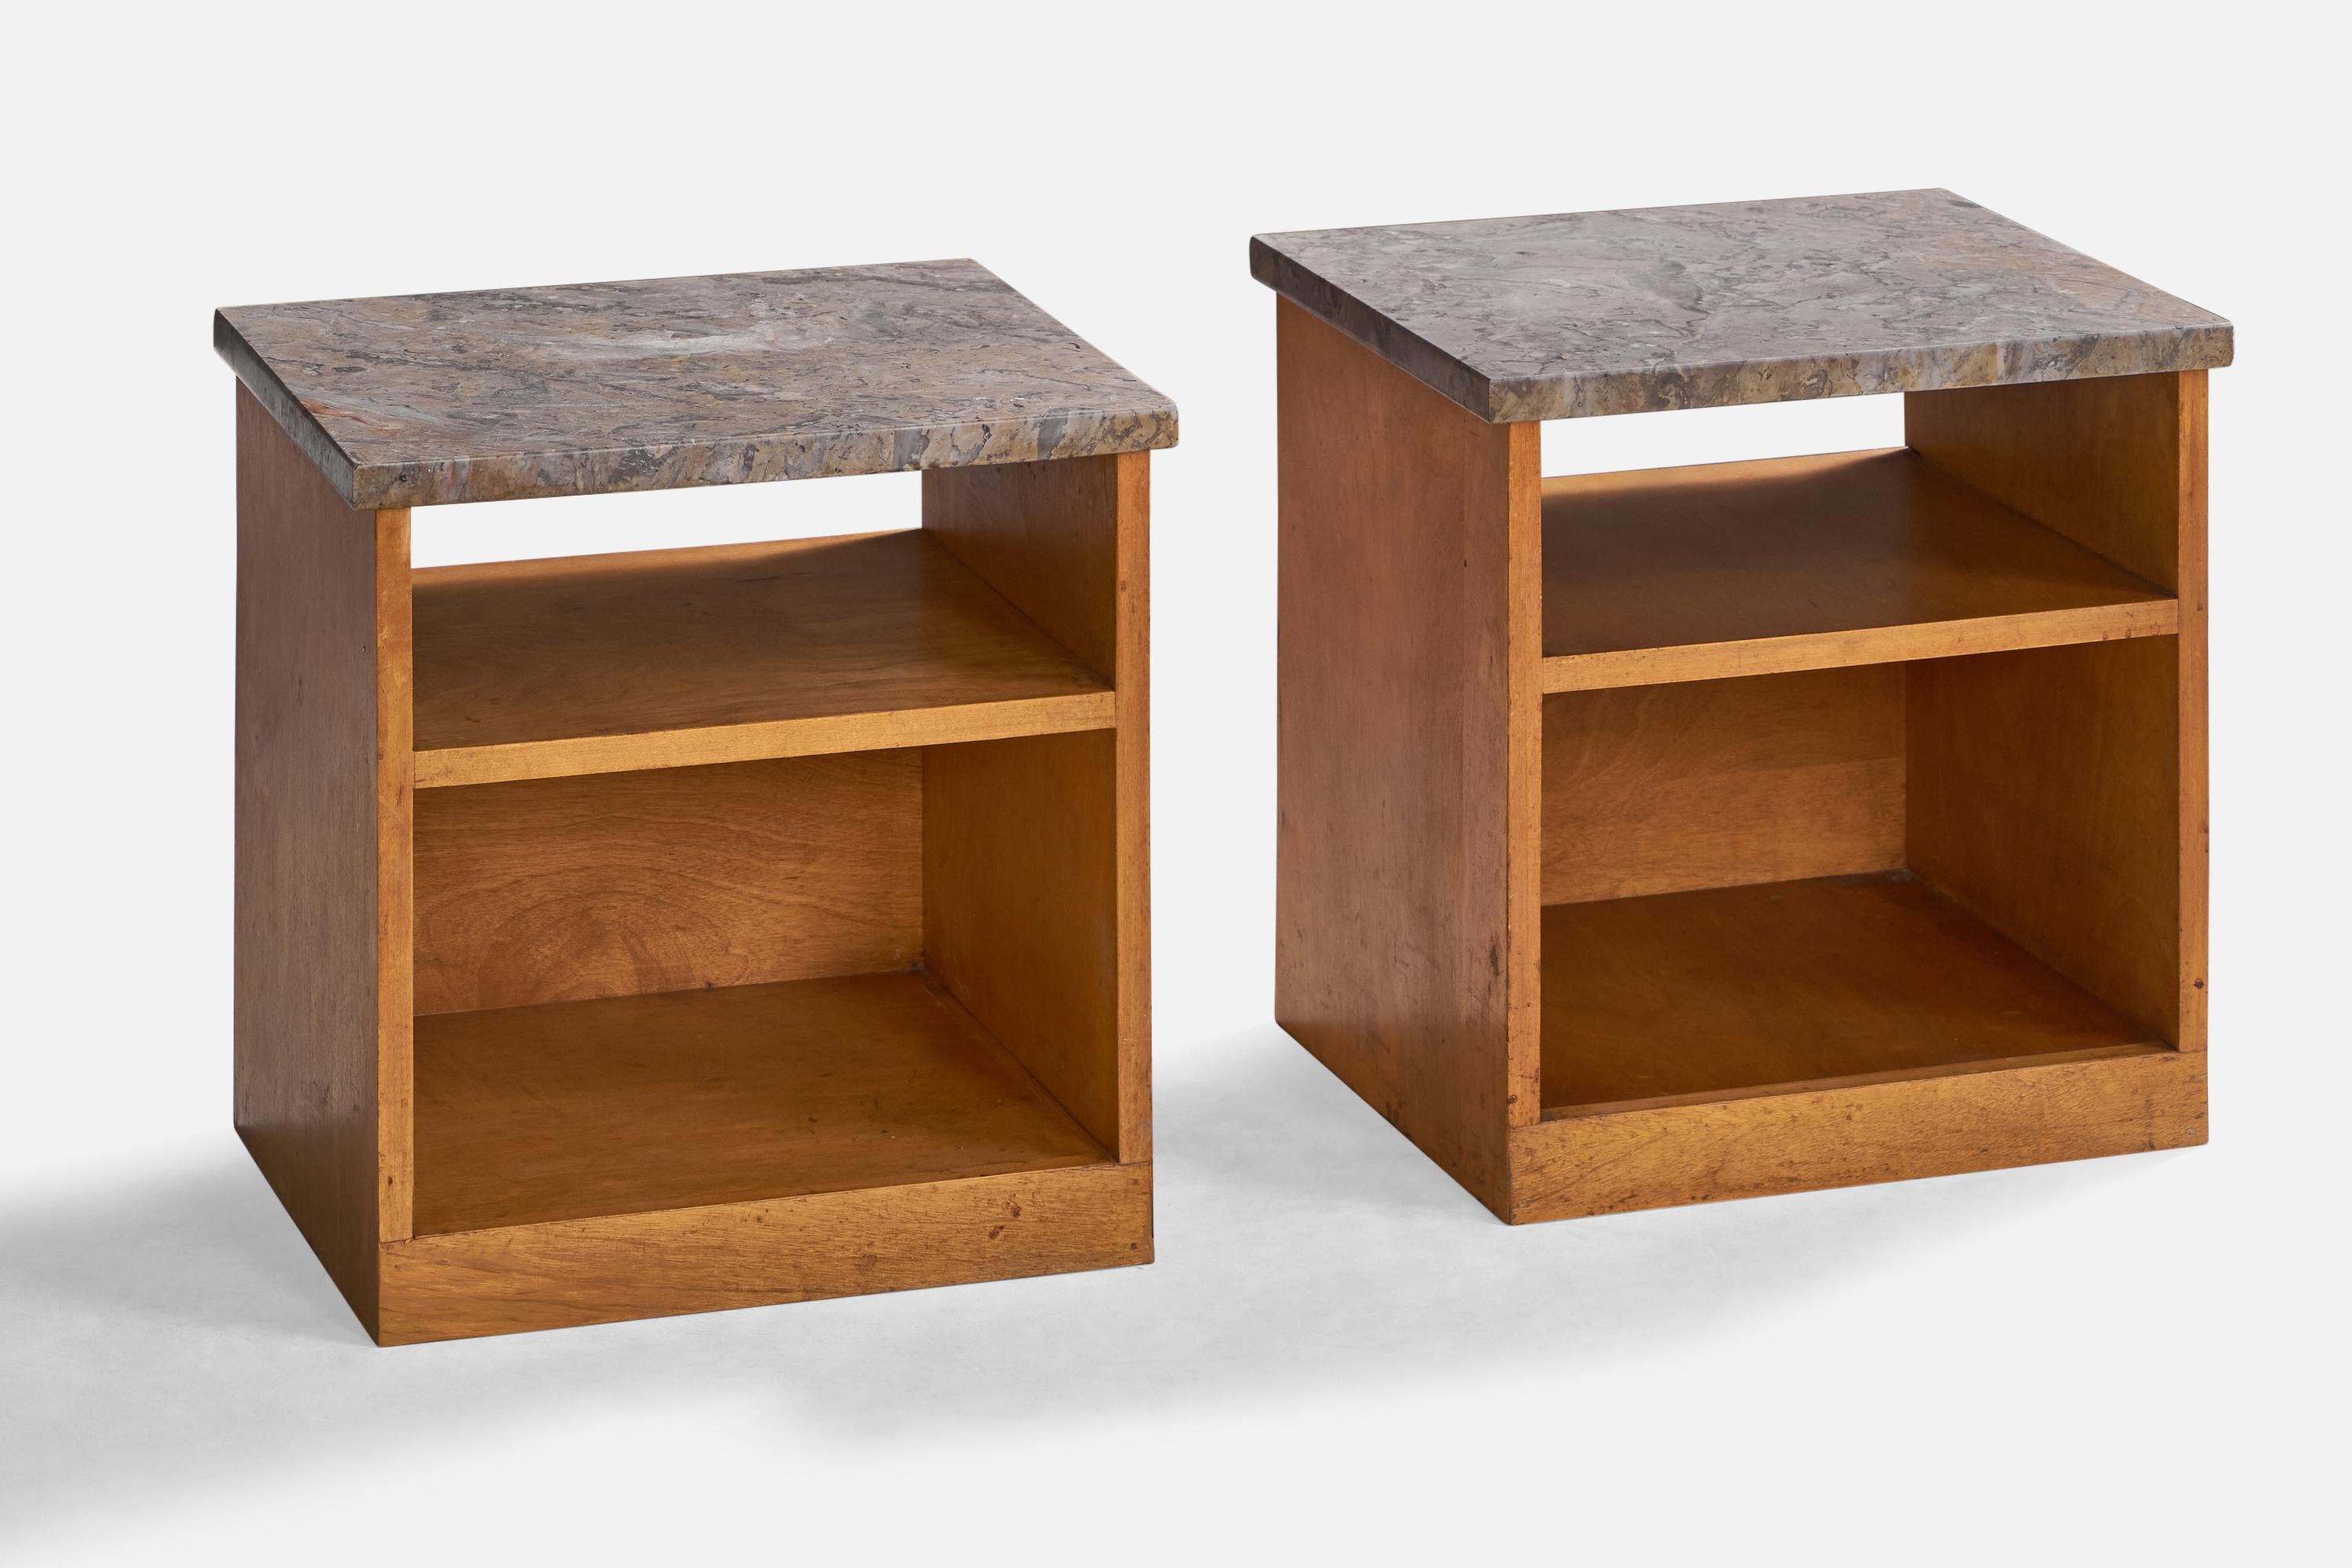 A pair of walnut and marble nightstands or bedside cabinets designed and produced in the US, c. 1950s.